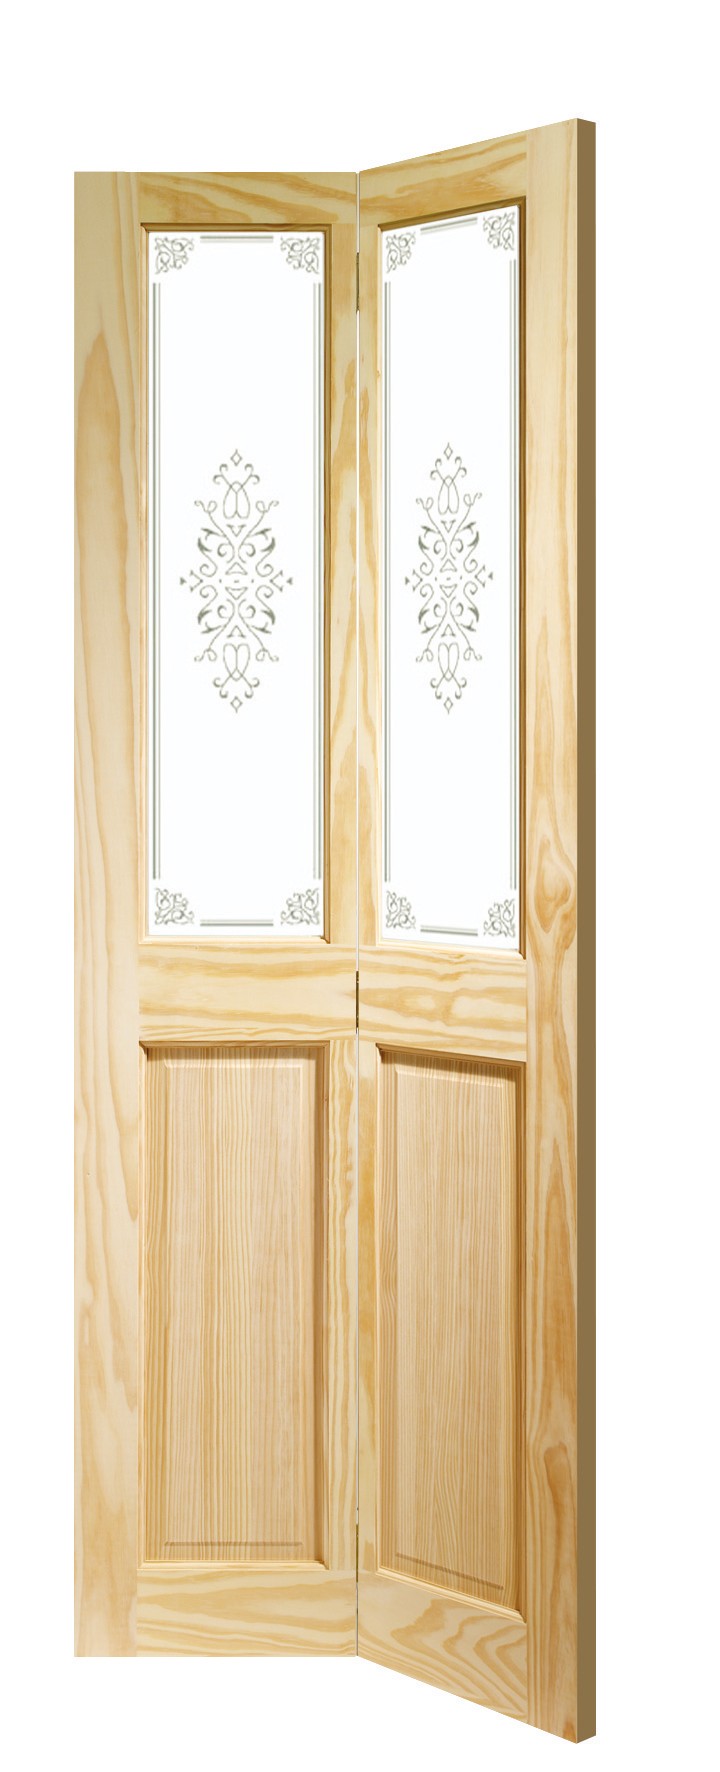 XL JOINERY DOORS -  GCPBFC30  Internal Clear Pine Victorian Bi-Fold with Campion Glass (30inch)  GCPBFC30